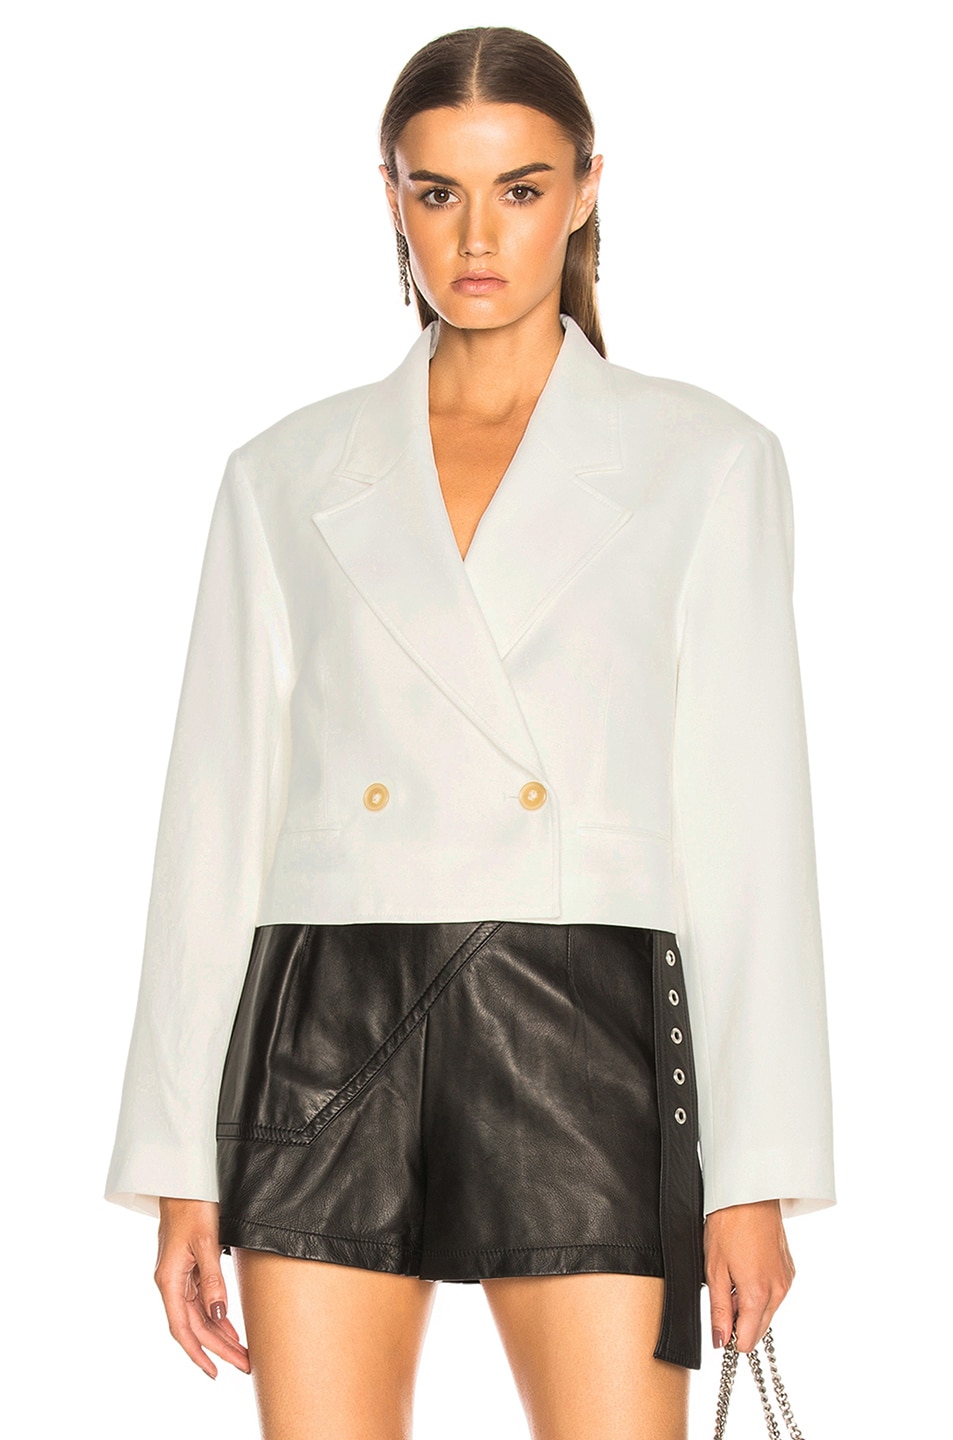 Image 1 of 3.1 phillip lim Tailored Blazer Jacket in Ivory